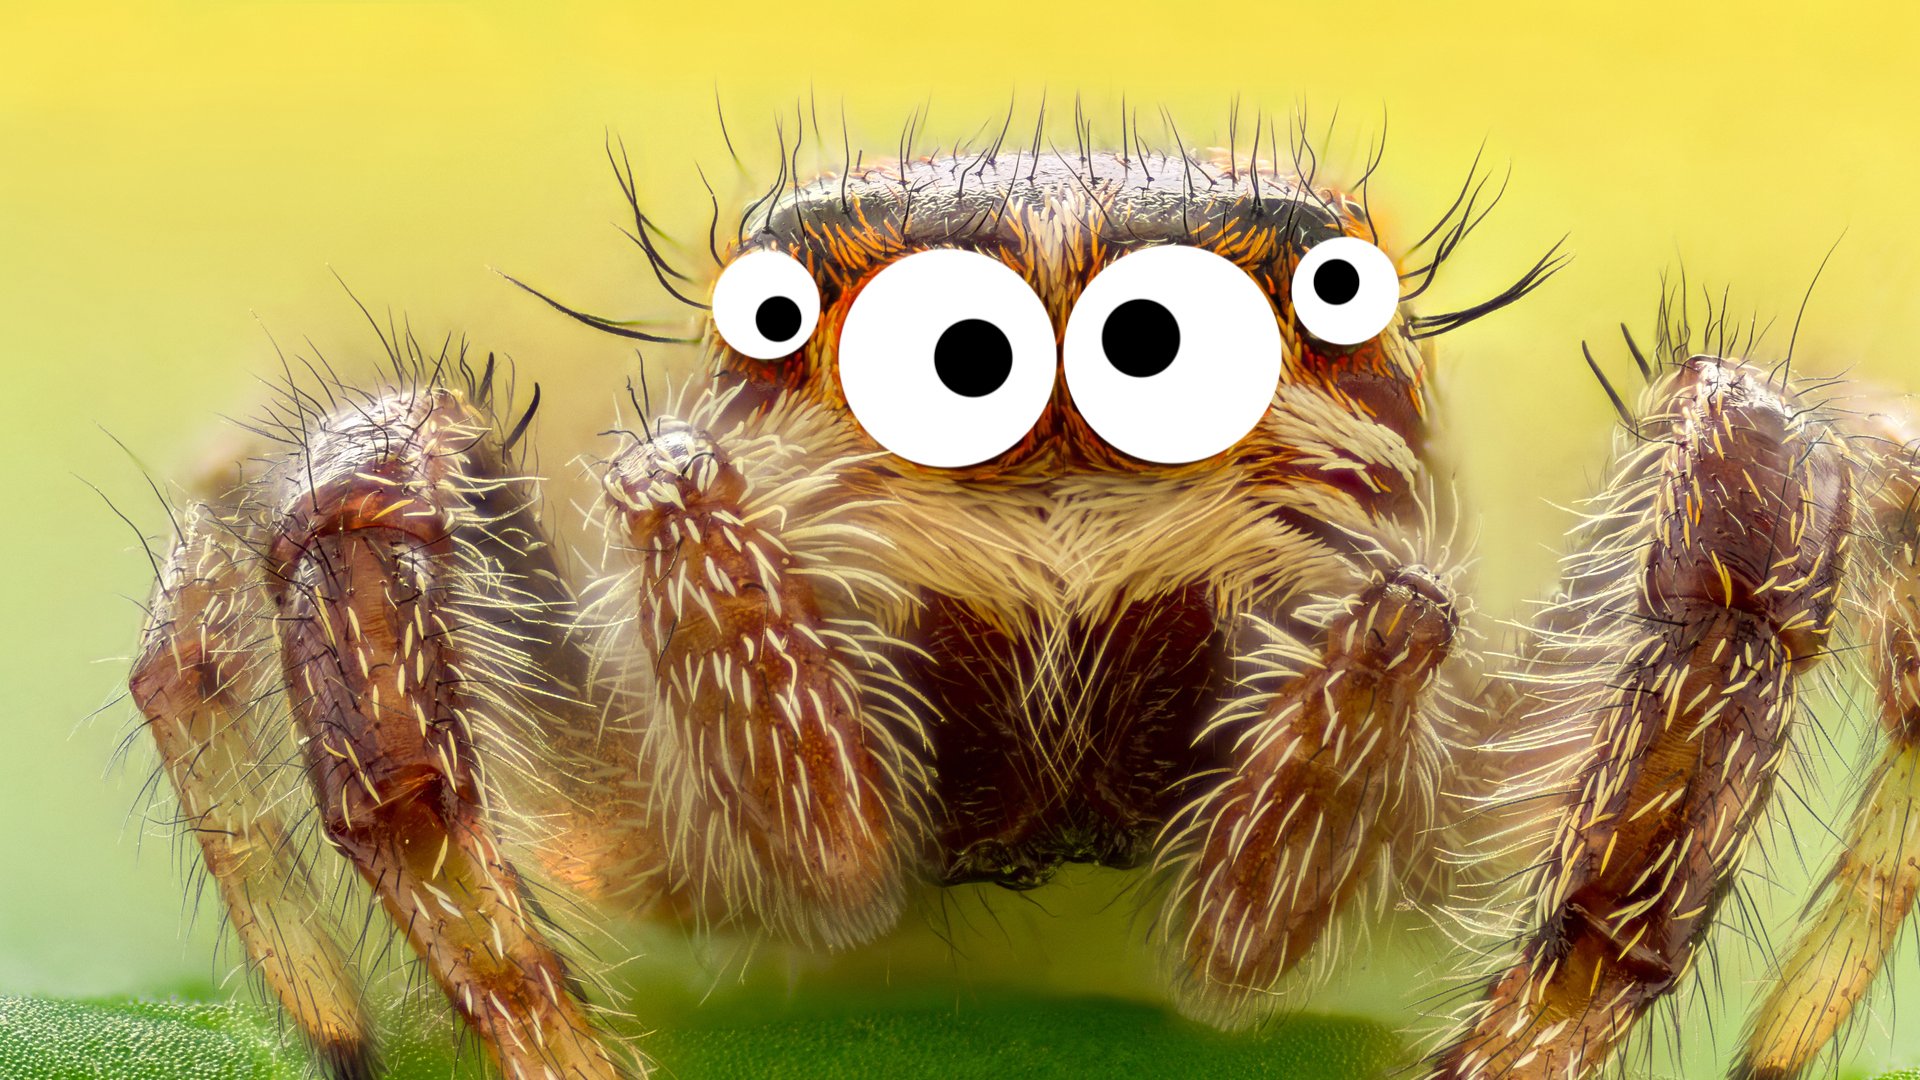 A jumping spider